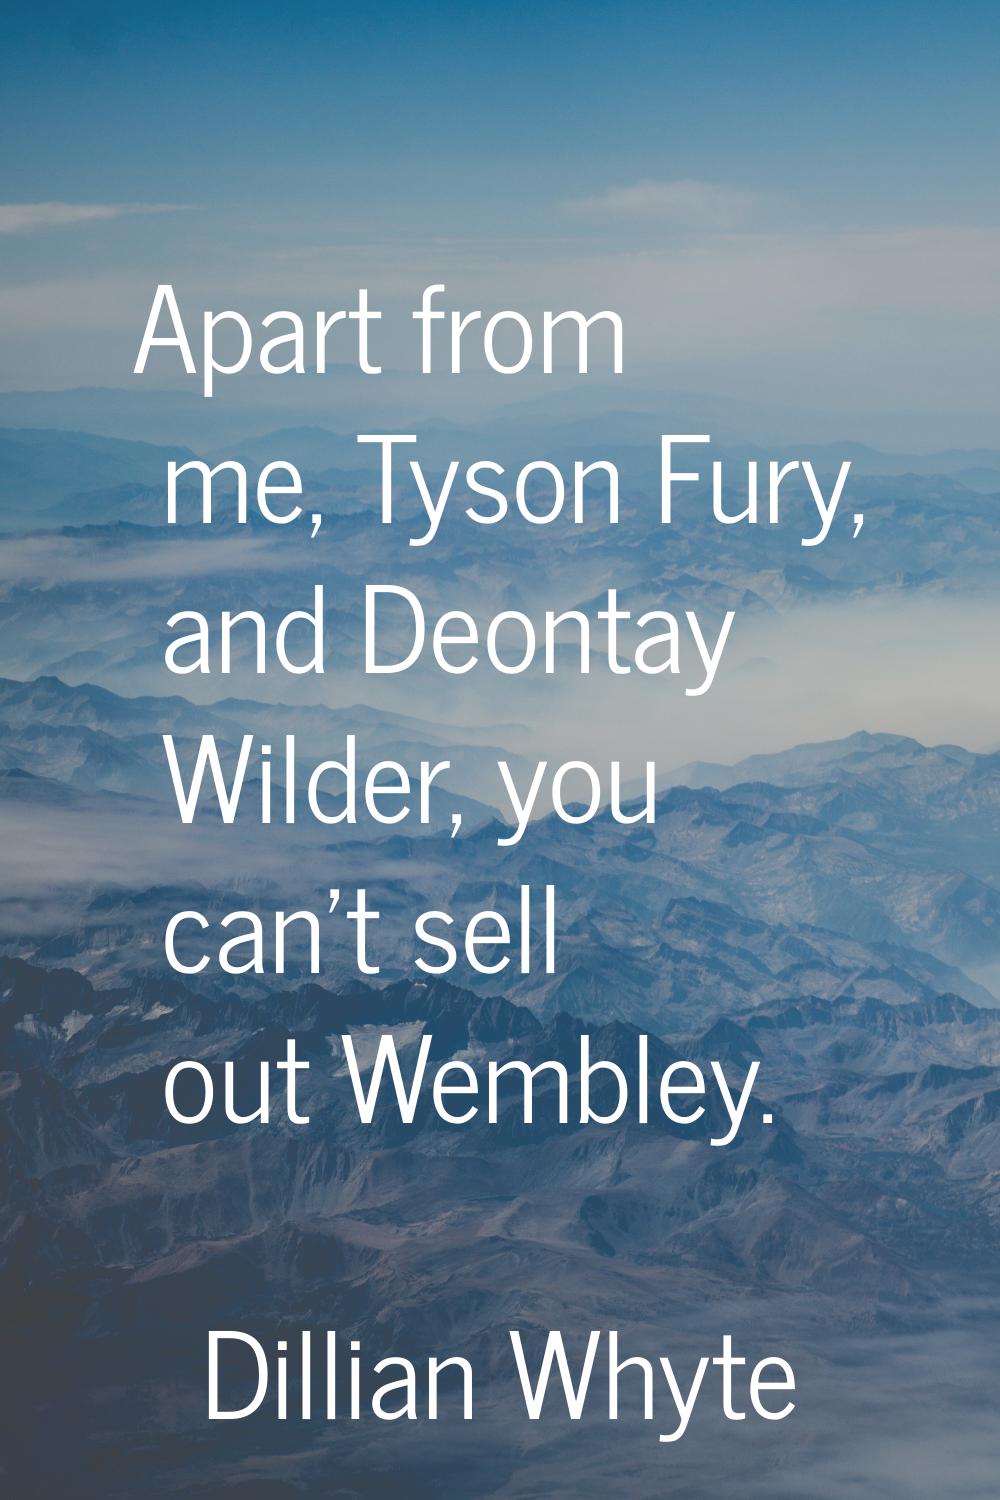 Apart from me, Tyson Fury, and Deontay Wilder, you can't sell out Wembley.